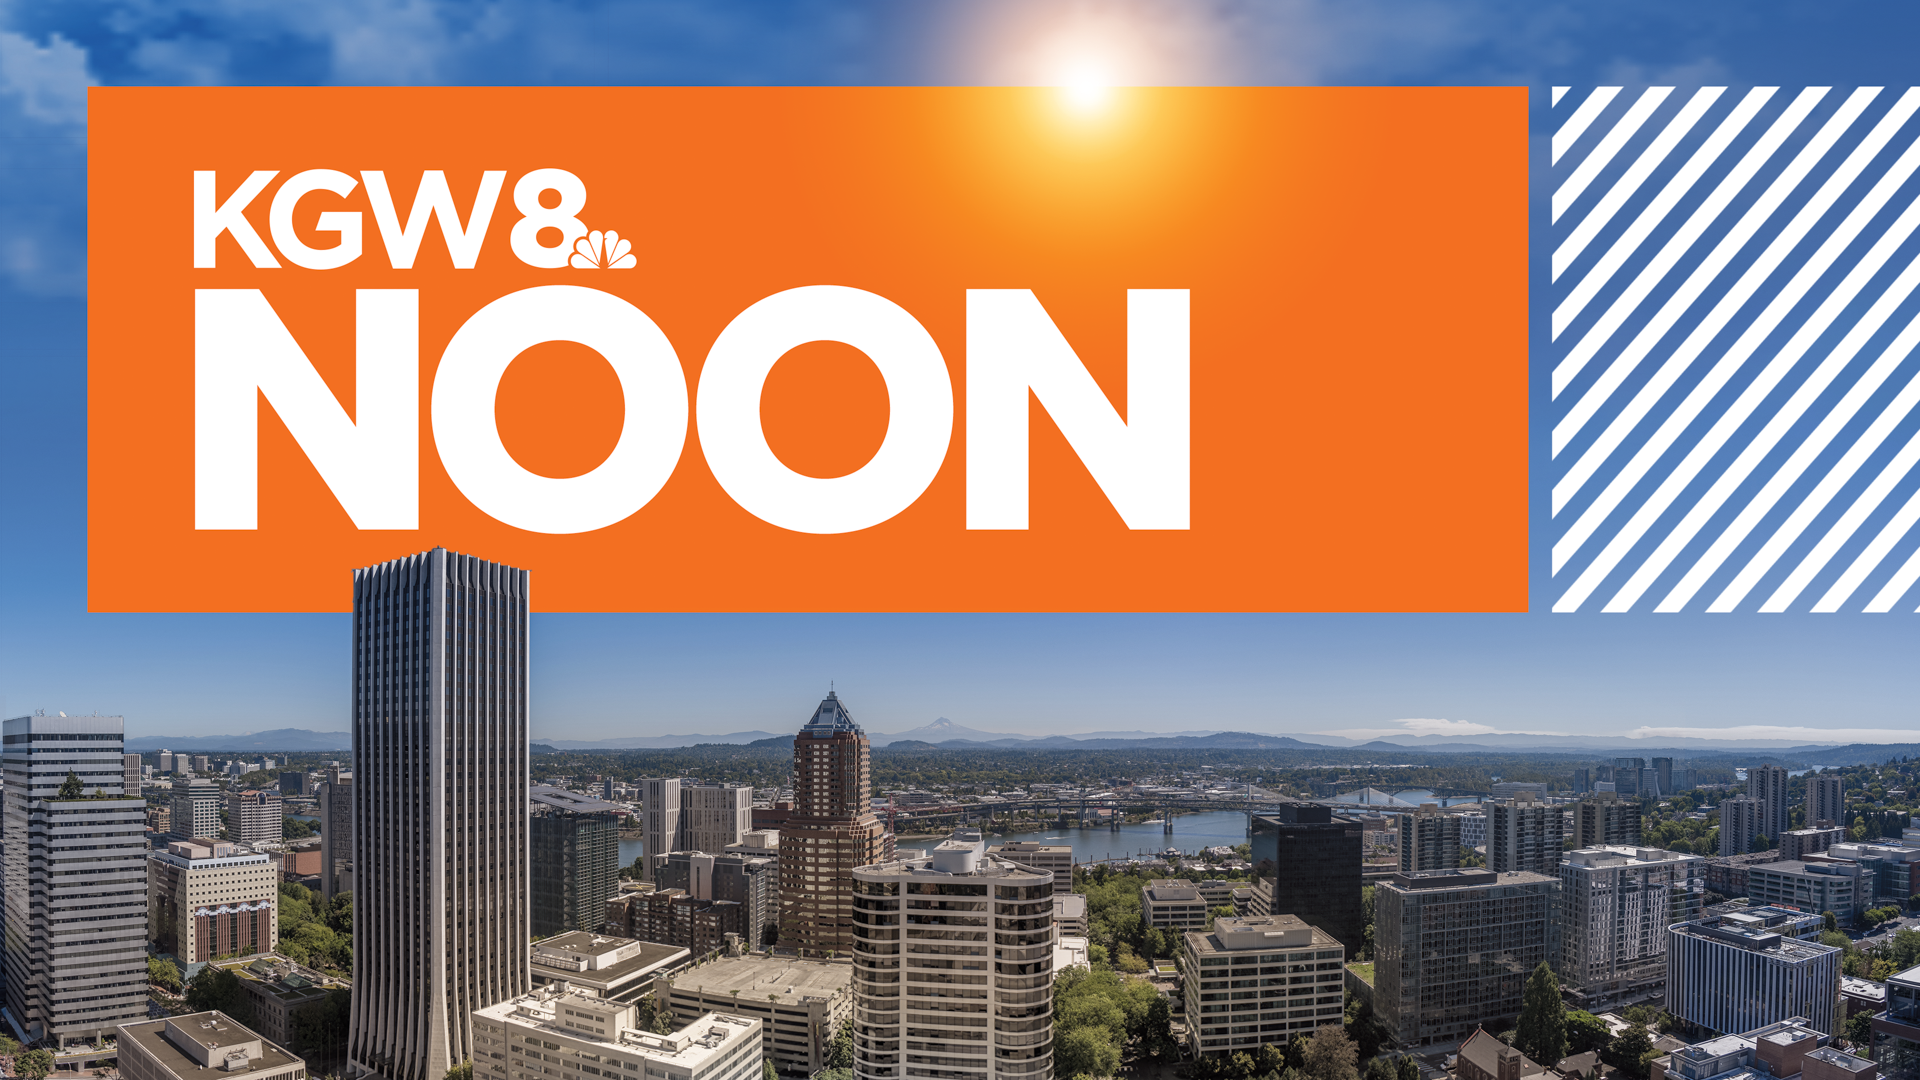 KGW Top Stories: Noon, Friday, August 19, 2022